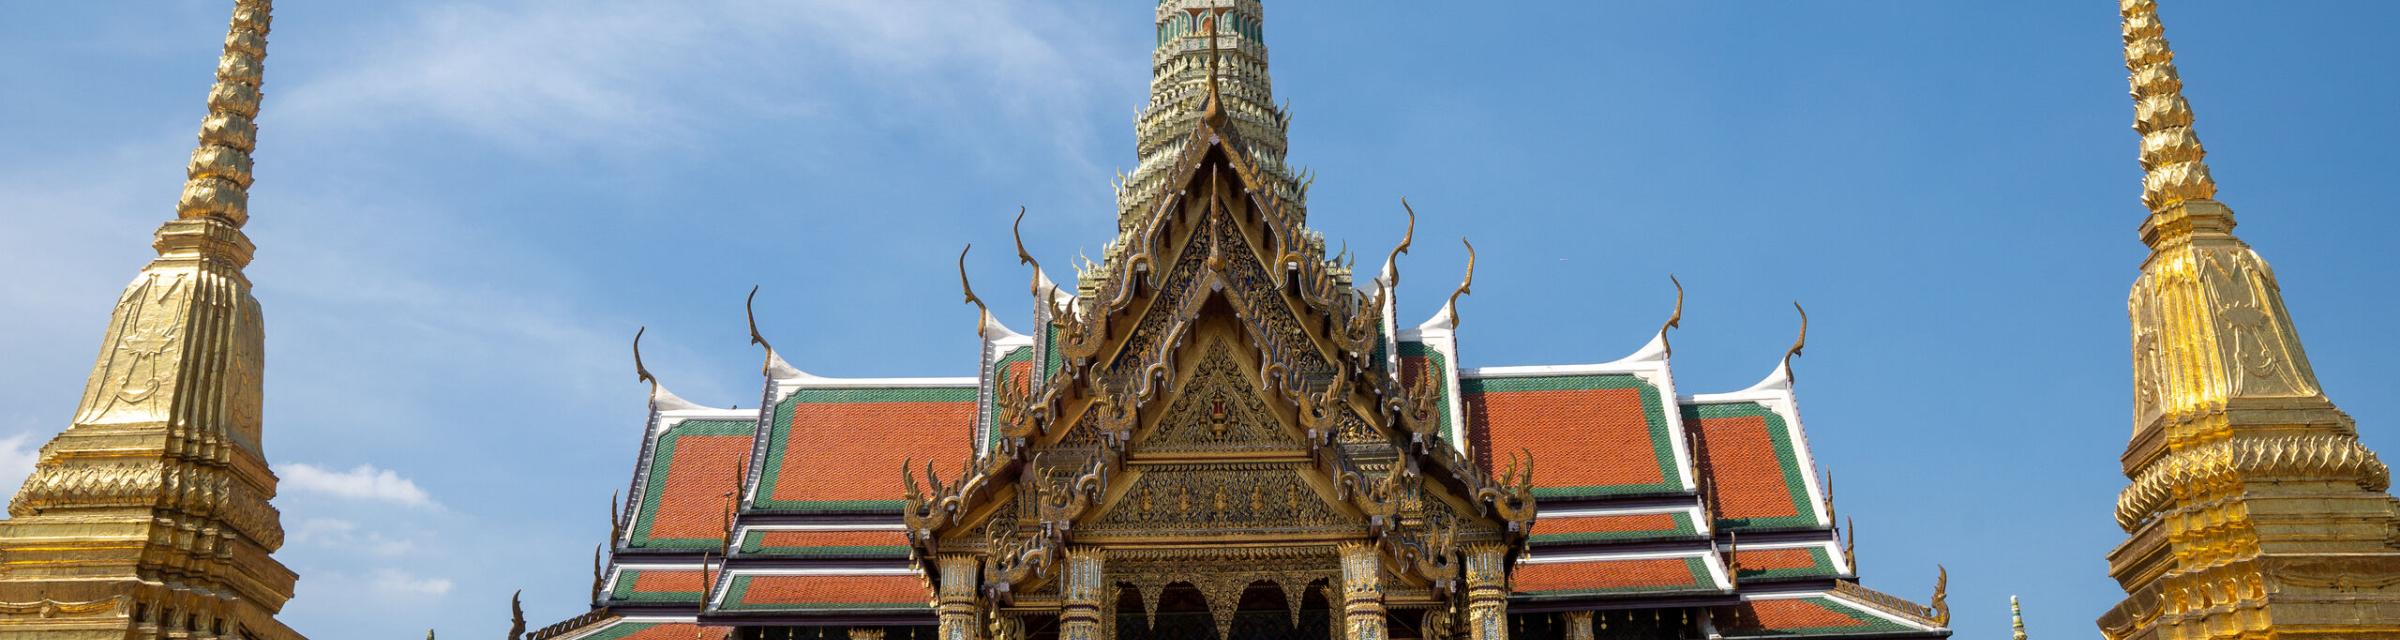 Tourists visit the temple complex at The Grand Palace in Bangkok, Thailand. Photo by RJ Rempel.